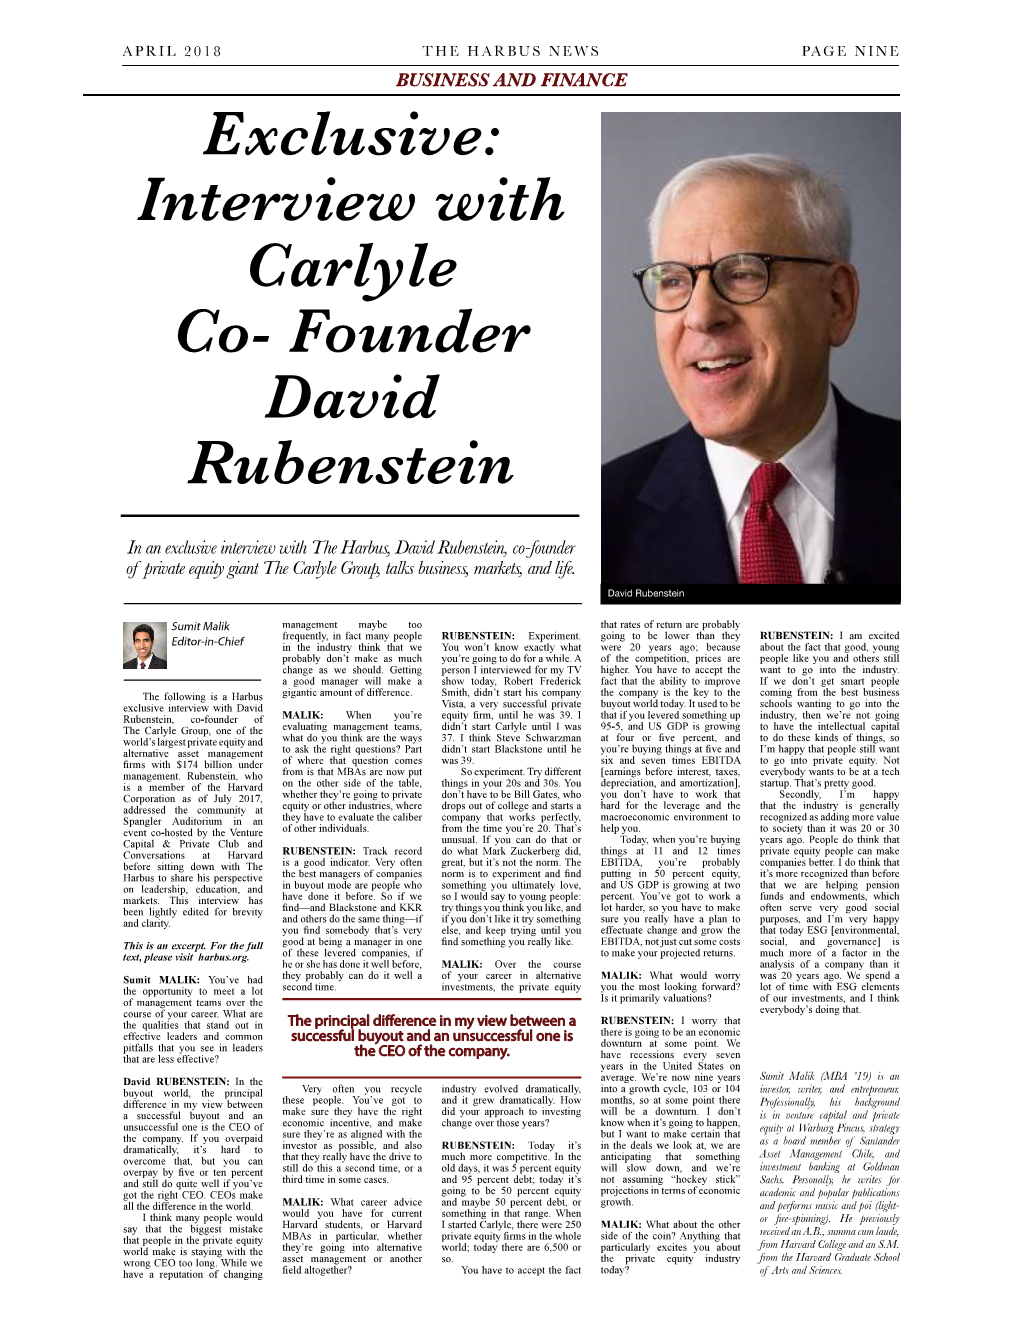 Exclusive: Interview with Carlyle Co- Founder David Rubenstein